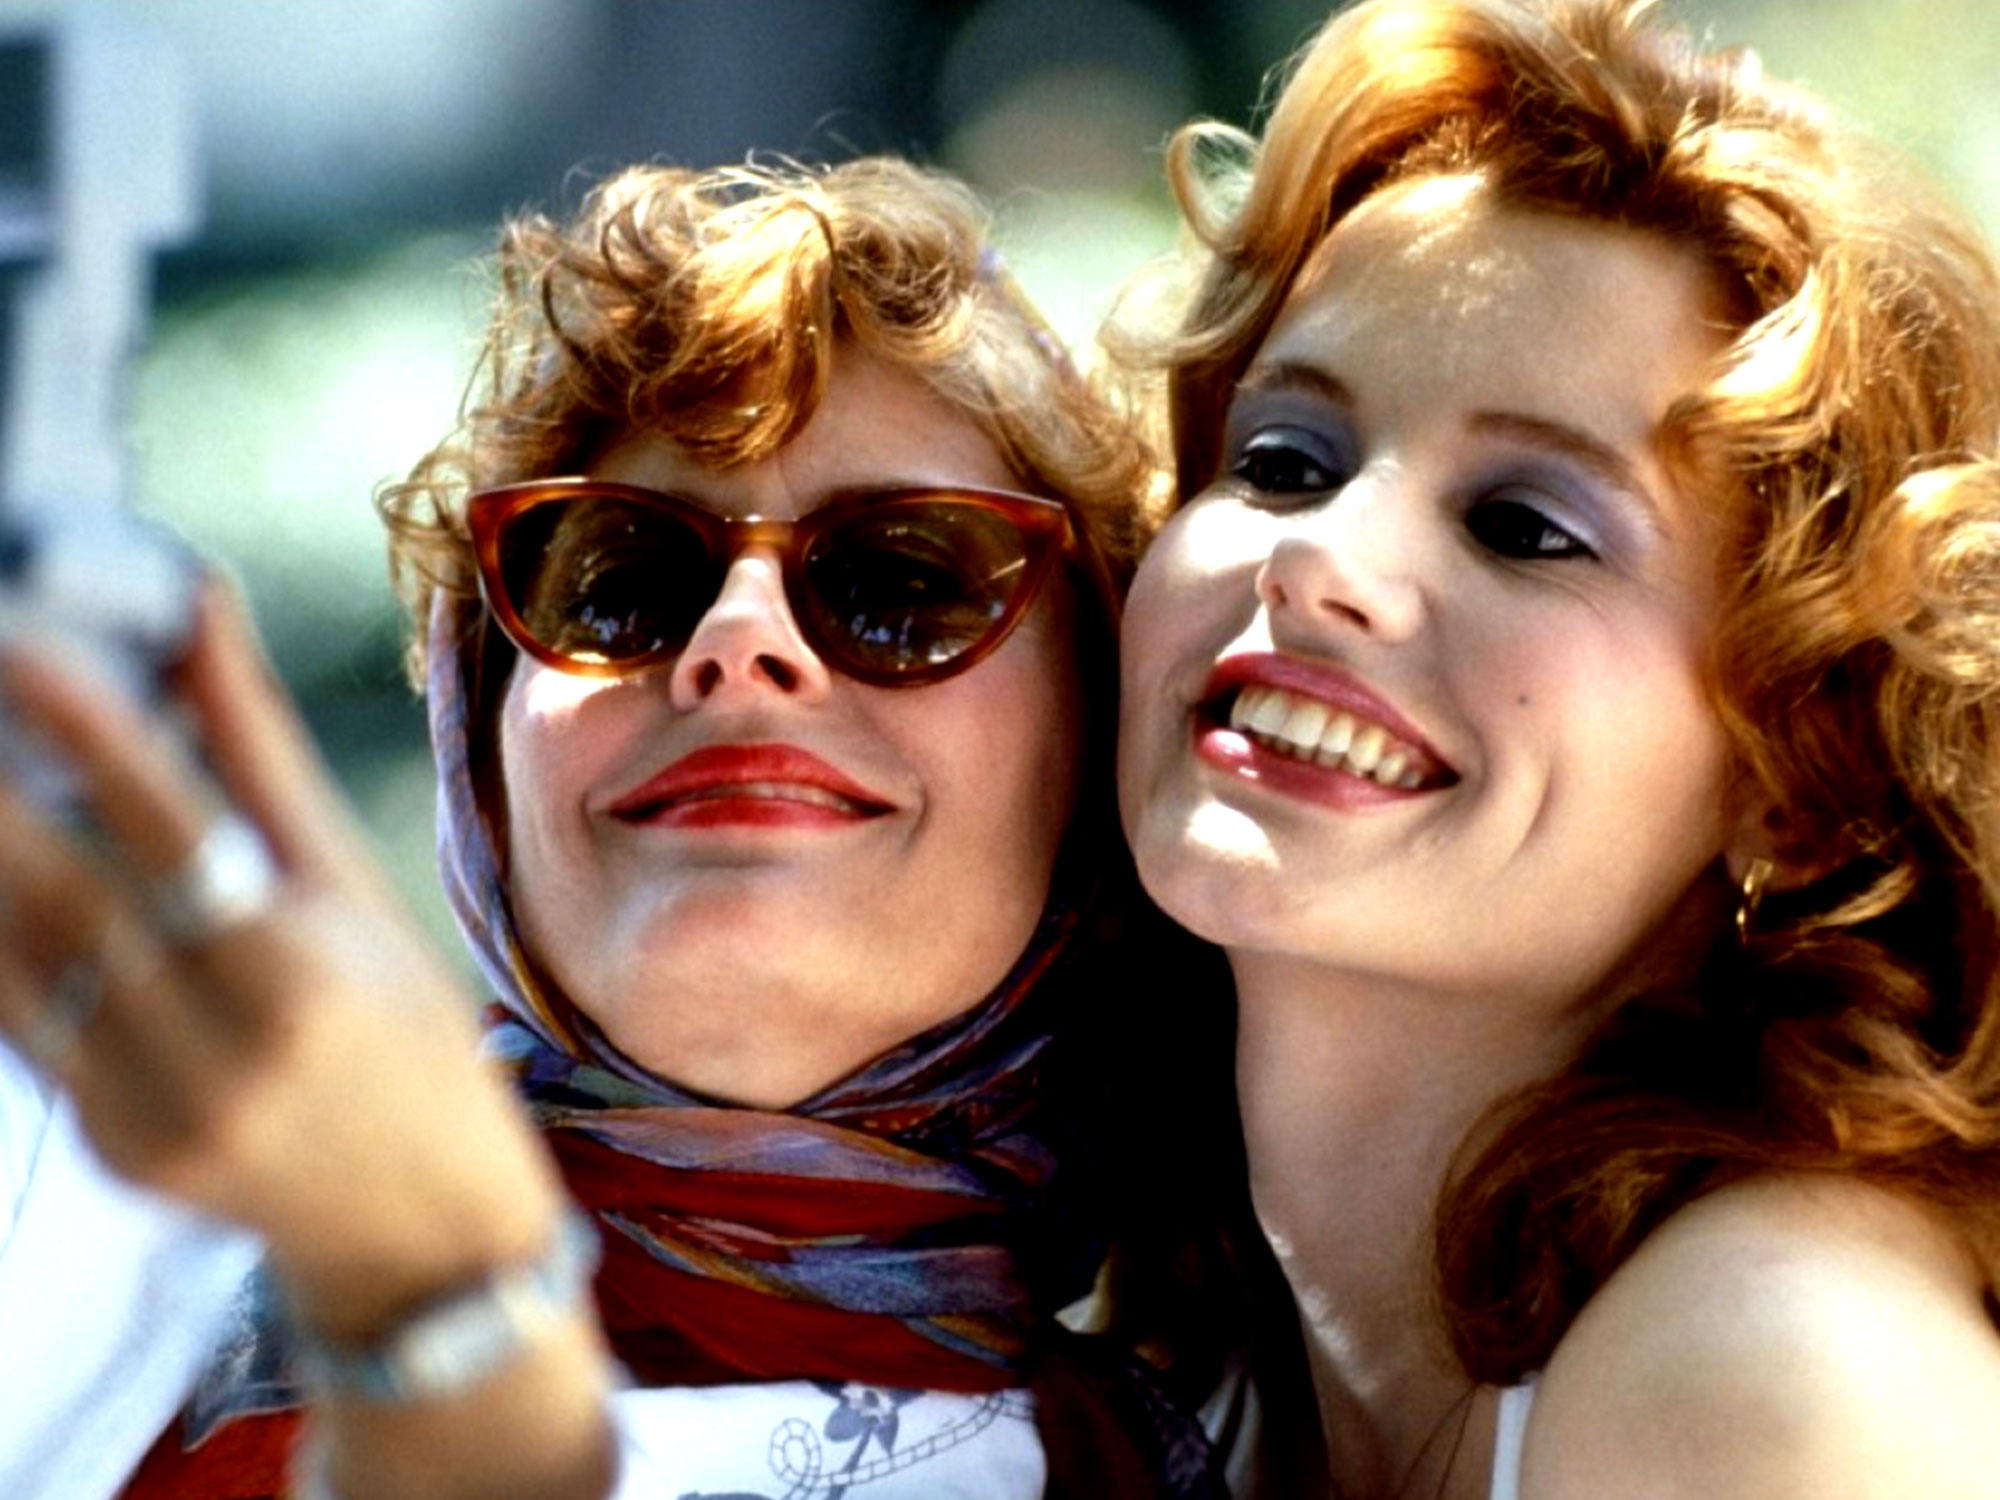 Dissecting the feminist legacy of Thelma & Louise